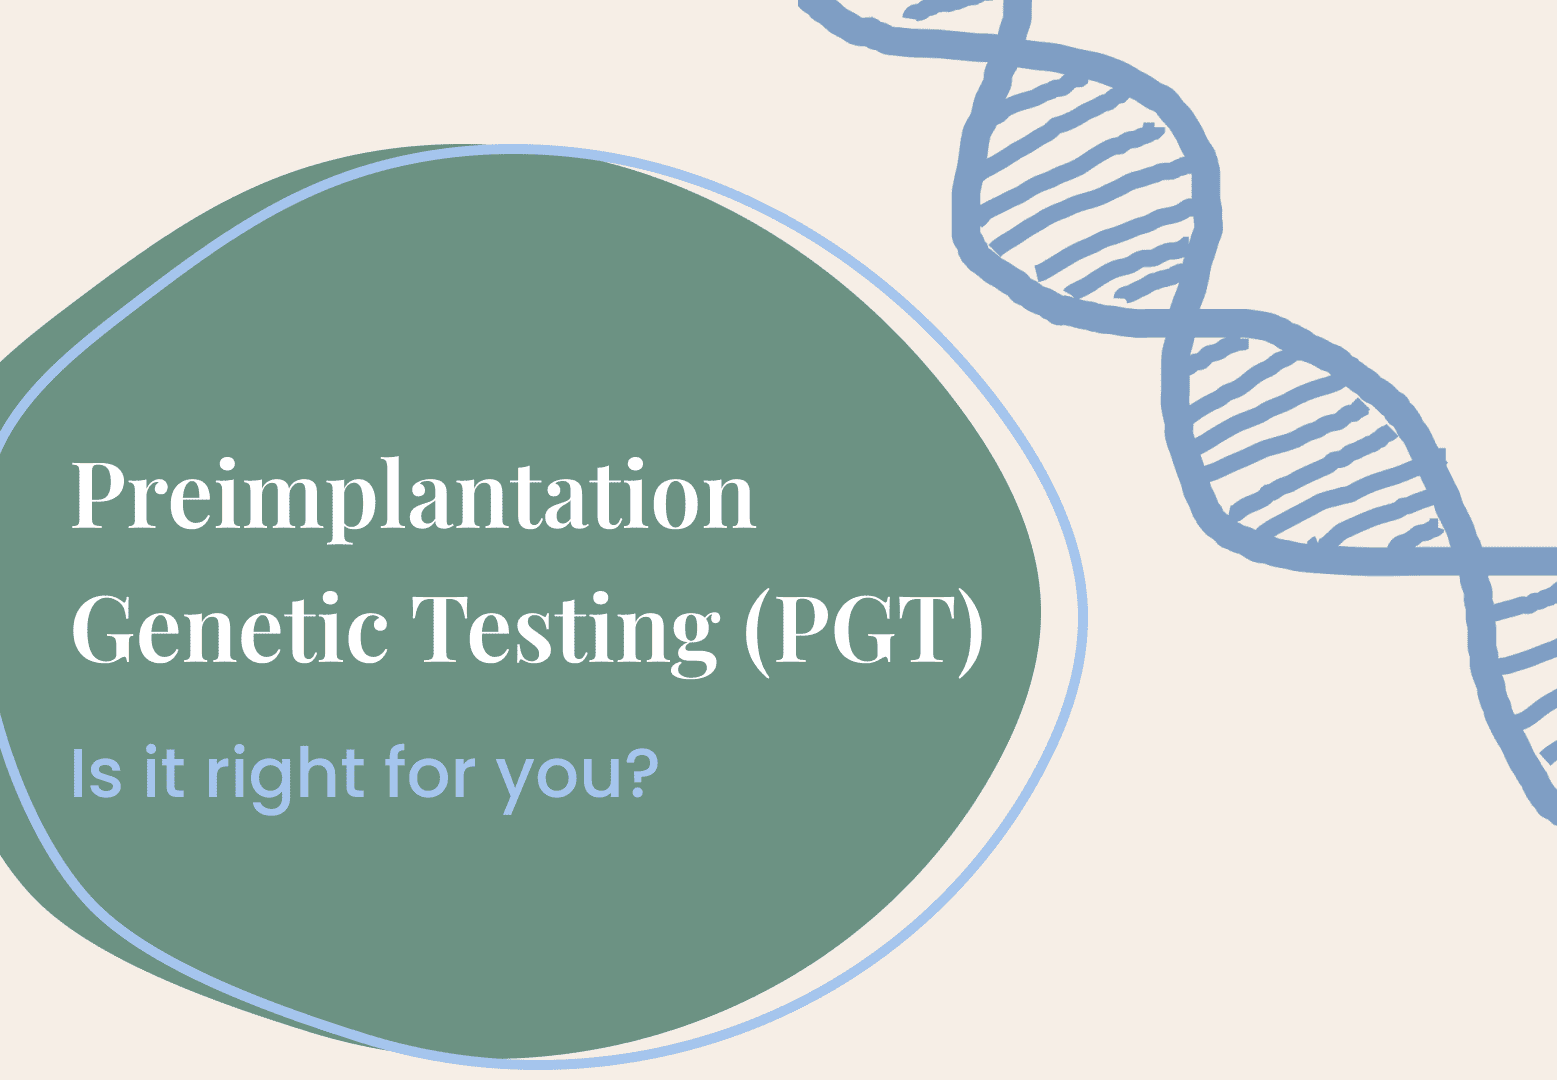 Preimplantation Genetic Testing (PGT): Is it Right for You?